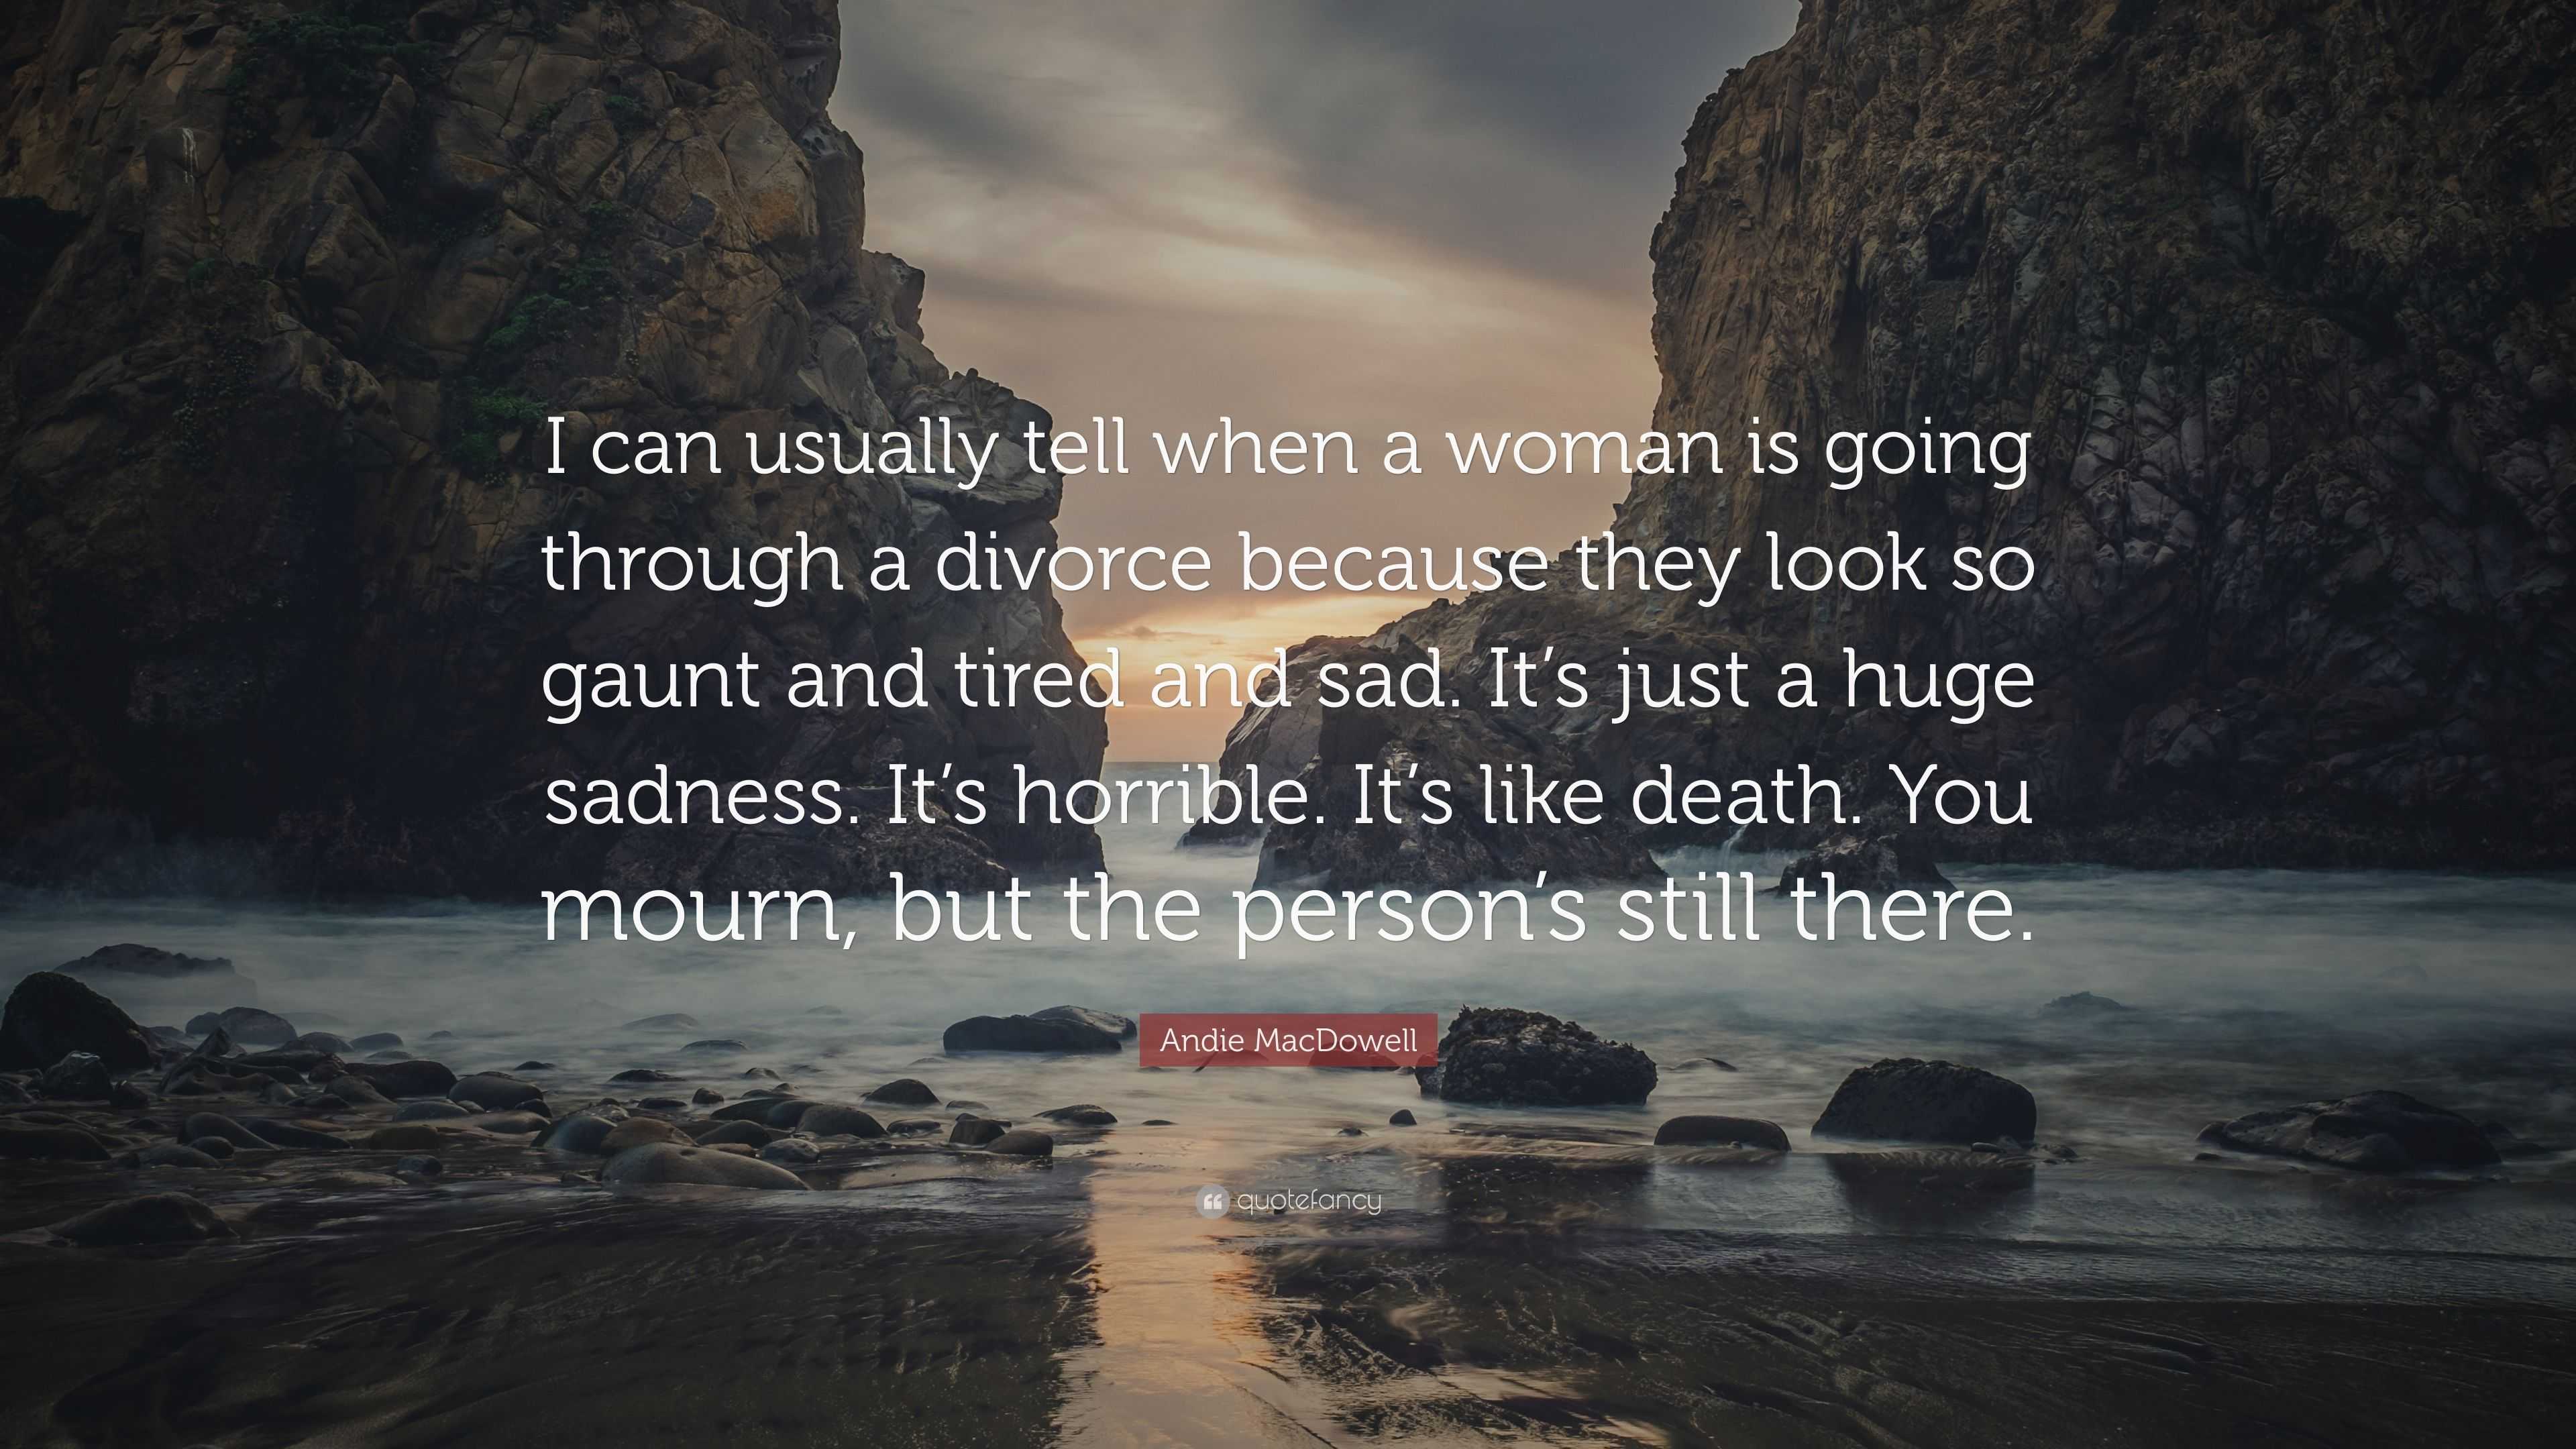 Andie MacDowell Quote: “I can usually tell when a woman is going ...